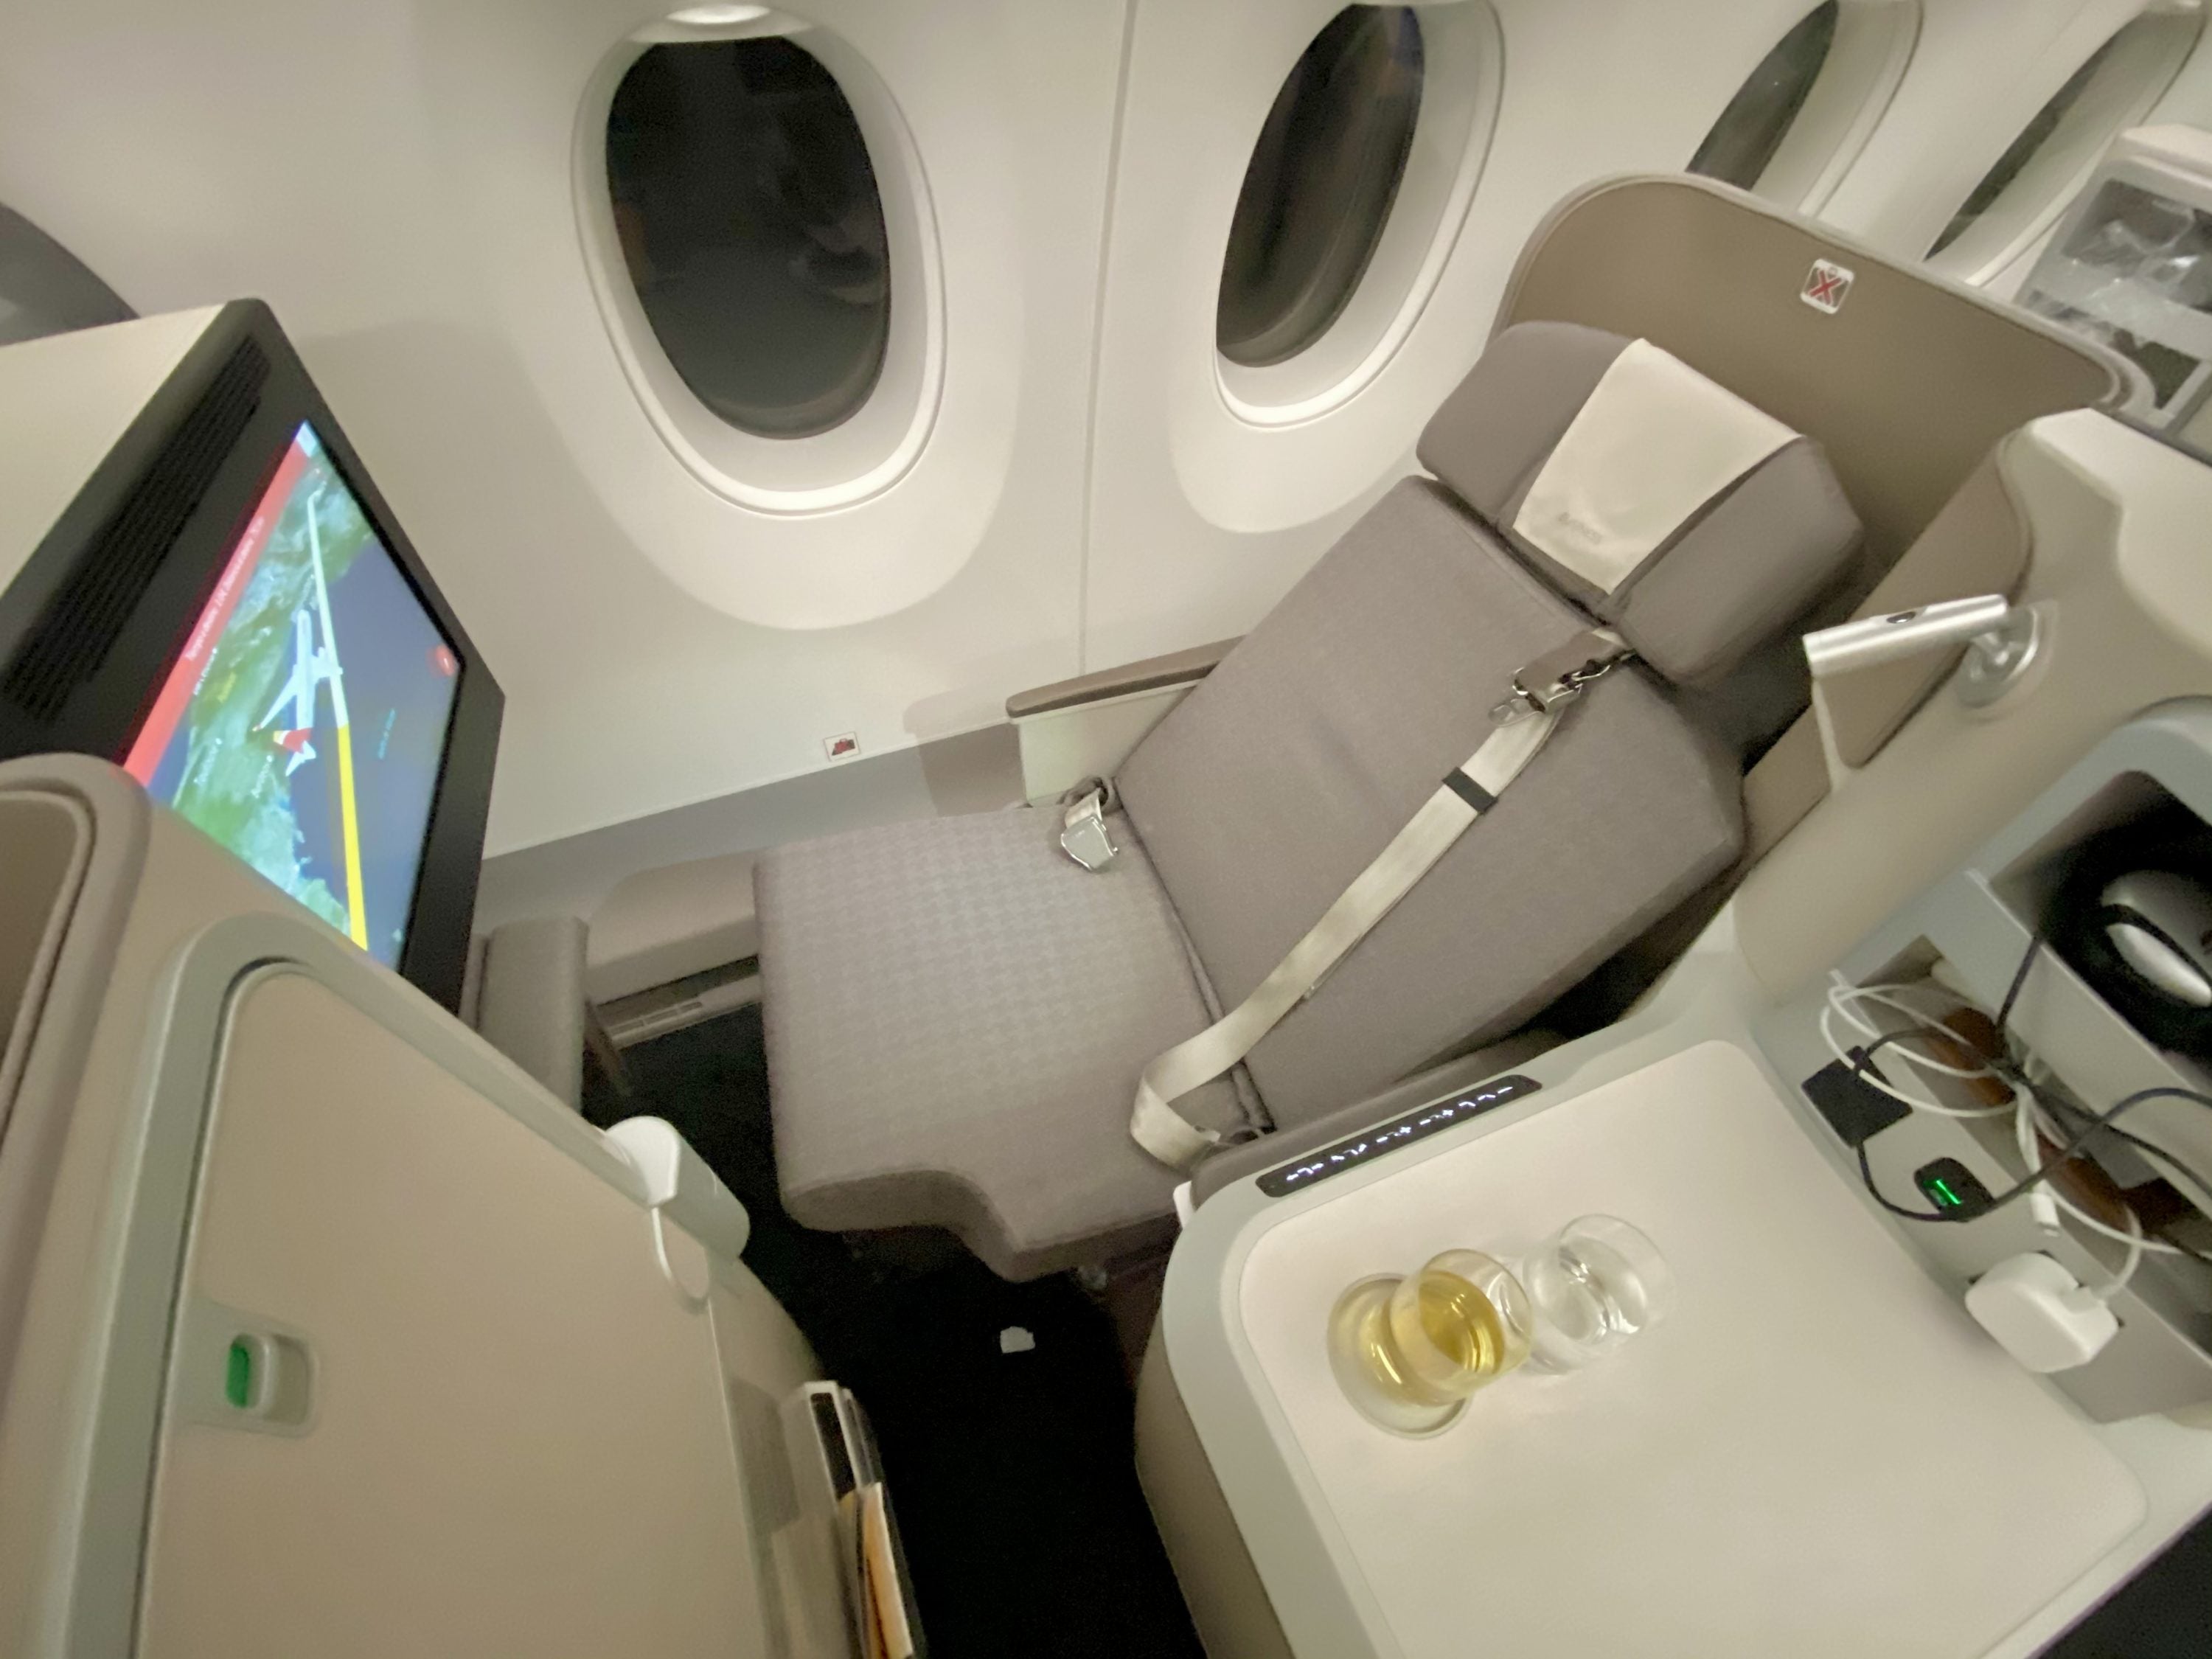 Iberia A350 business class seat in reclined position